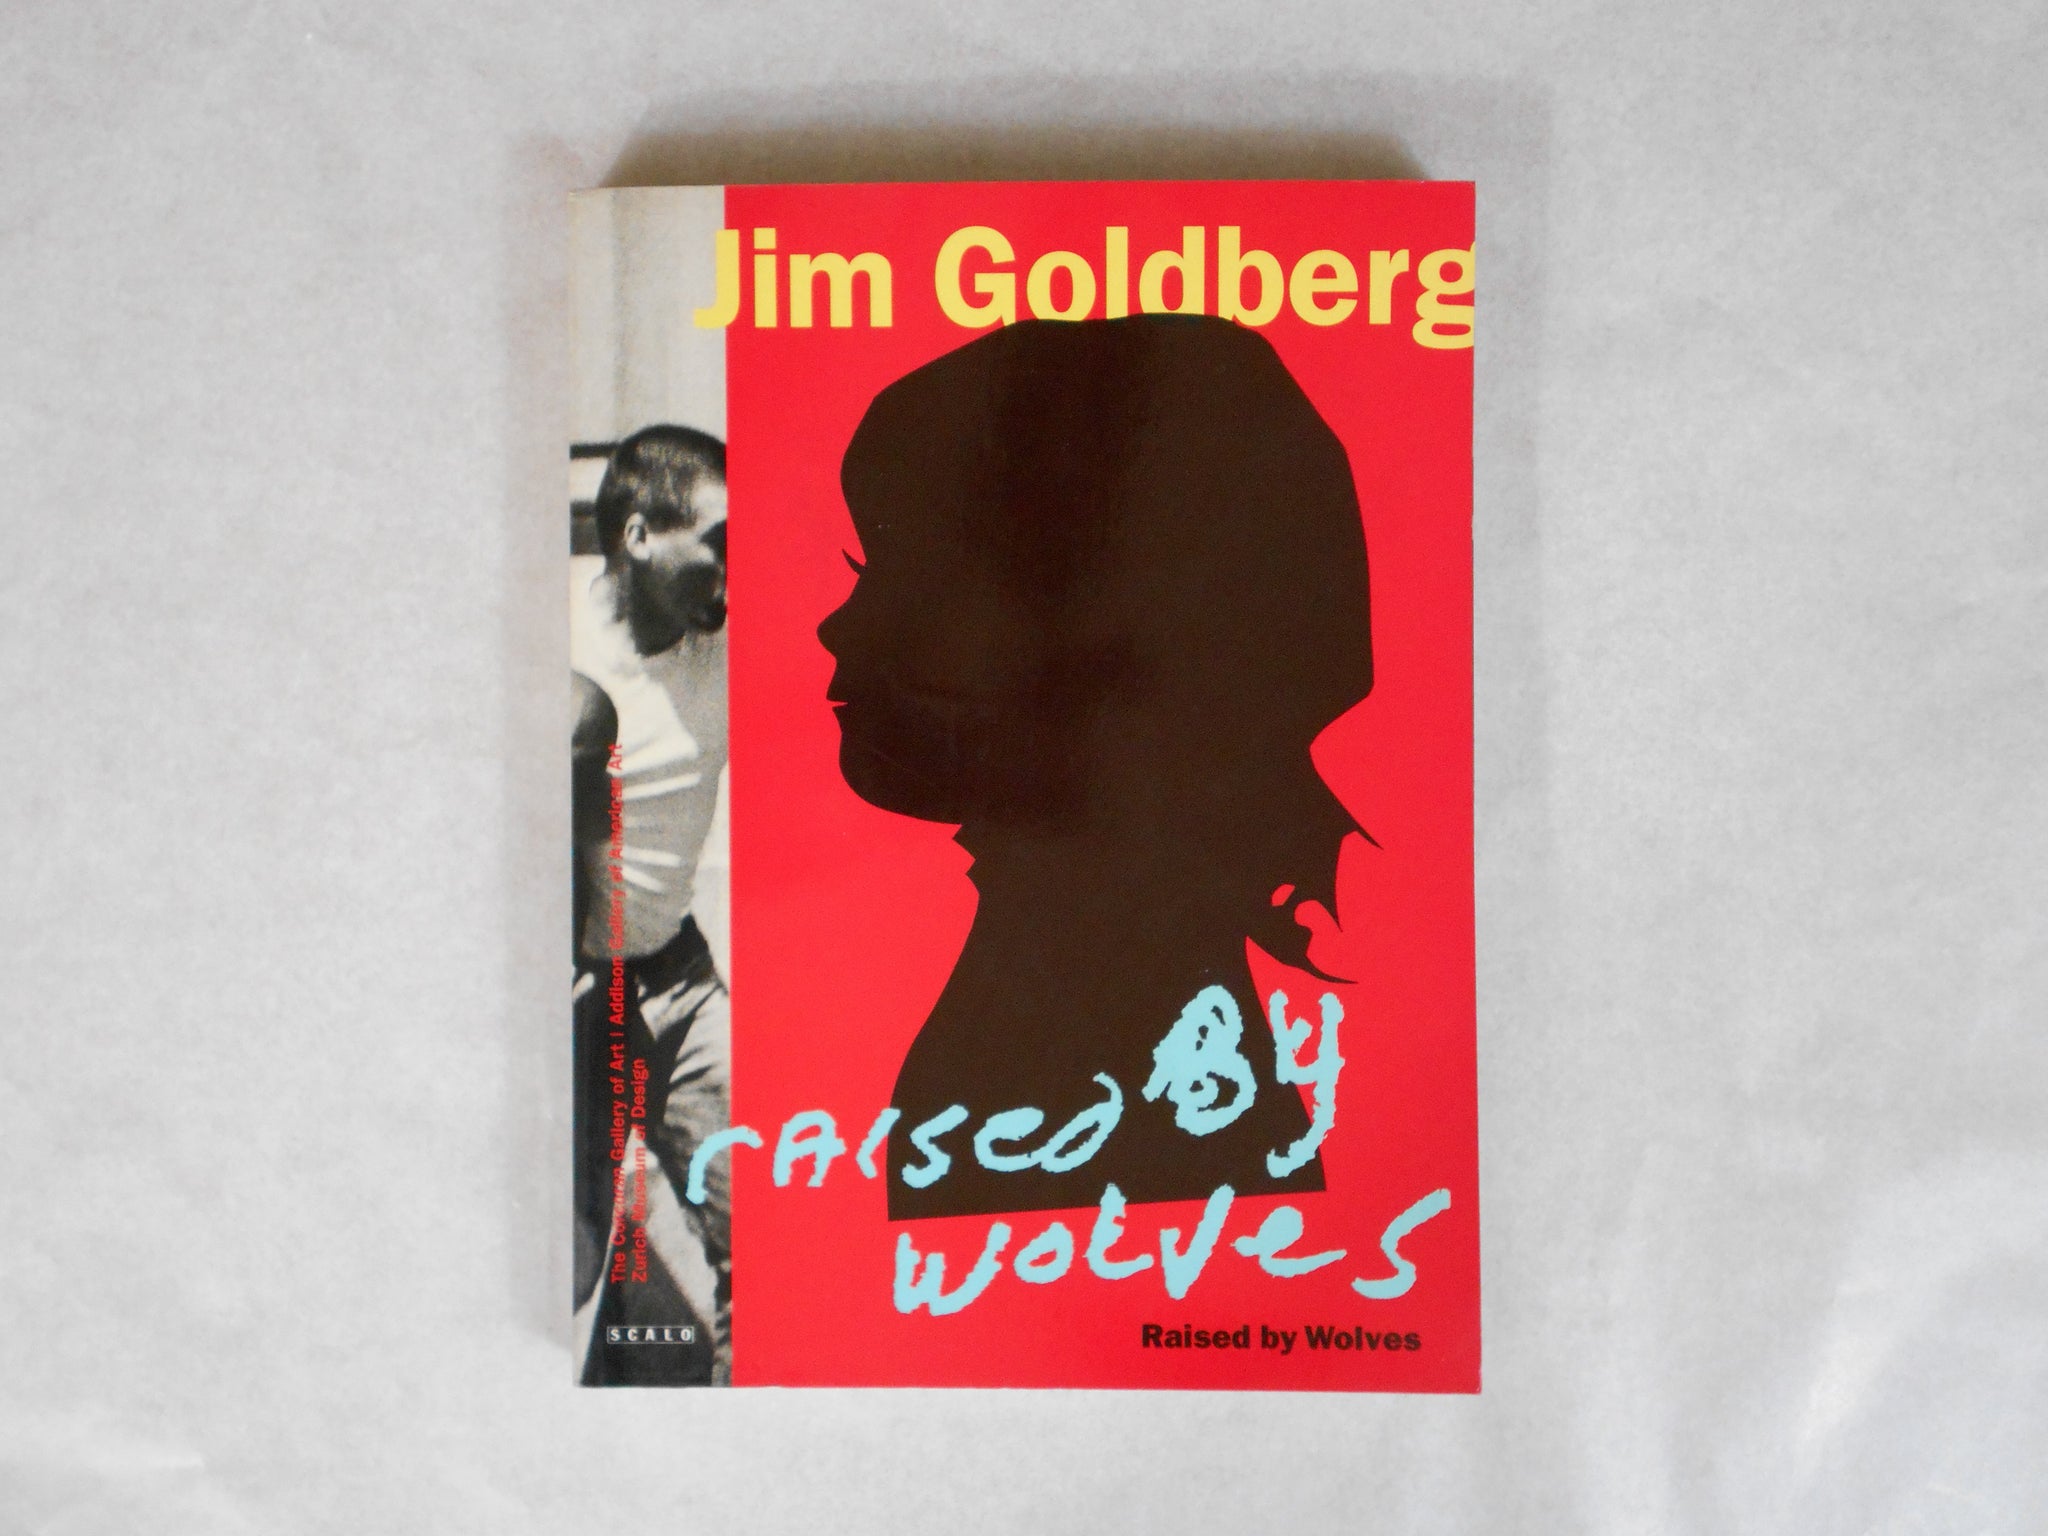 Rised by wolves | Jim Golberg | Scalo 1995